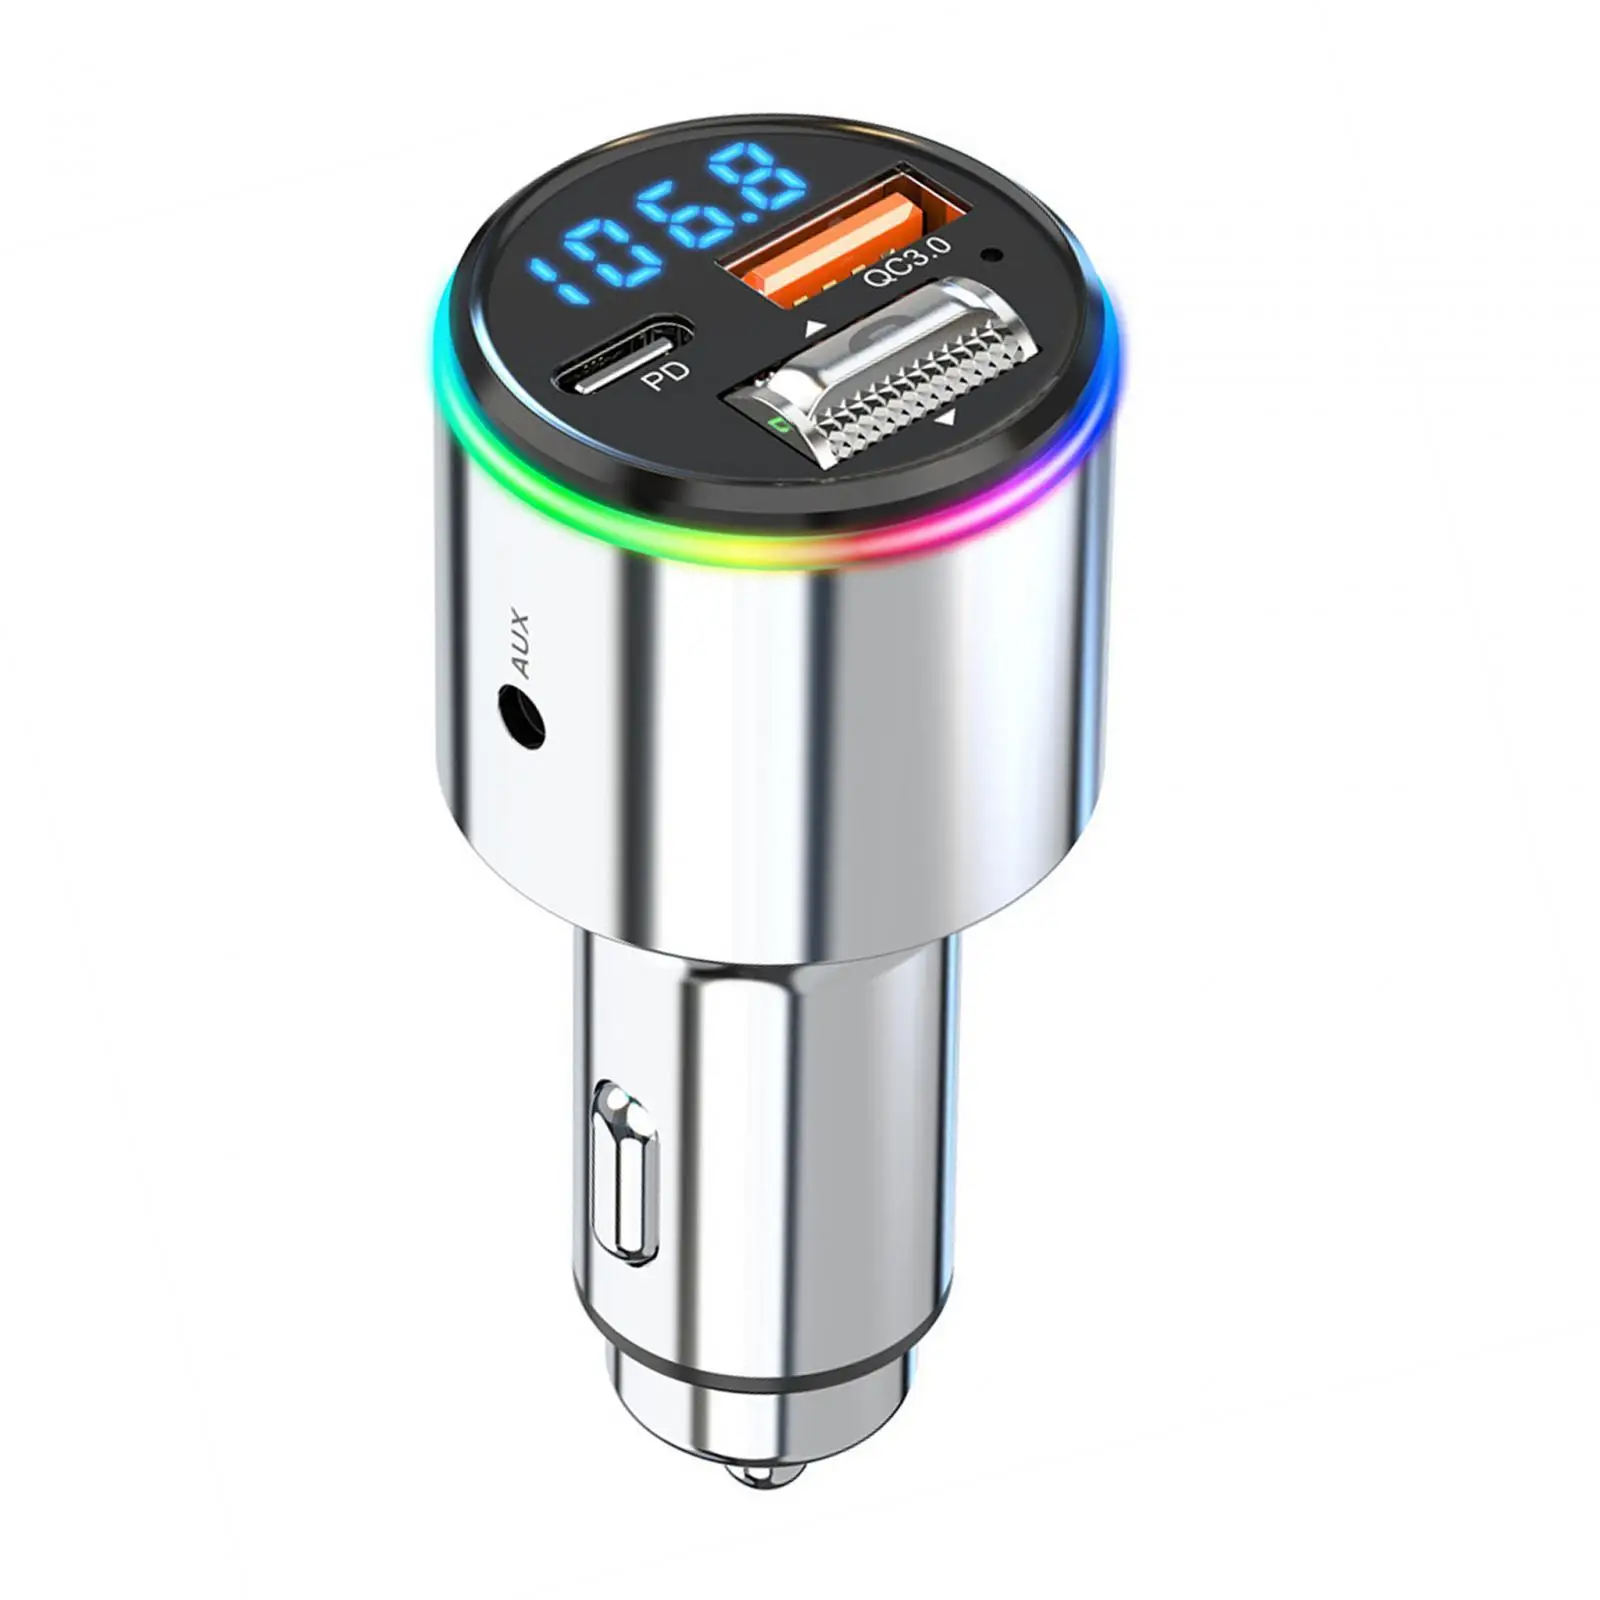 V5.3 FM Transmitter for Car Support Hands Free Call with RGB Color QC2.0 Fcp Music Player FM Radio Adapter for SUV Truck